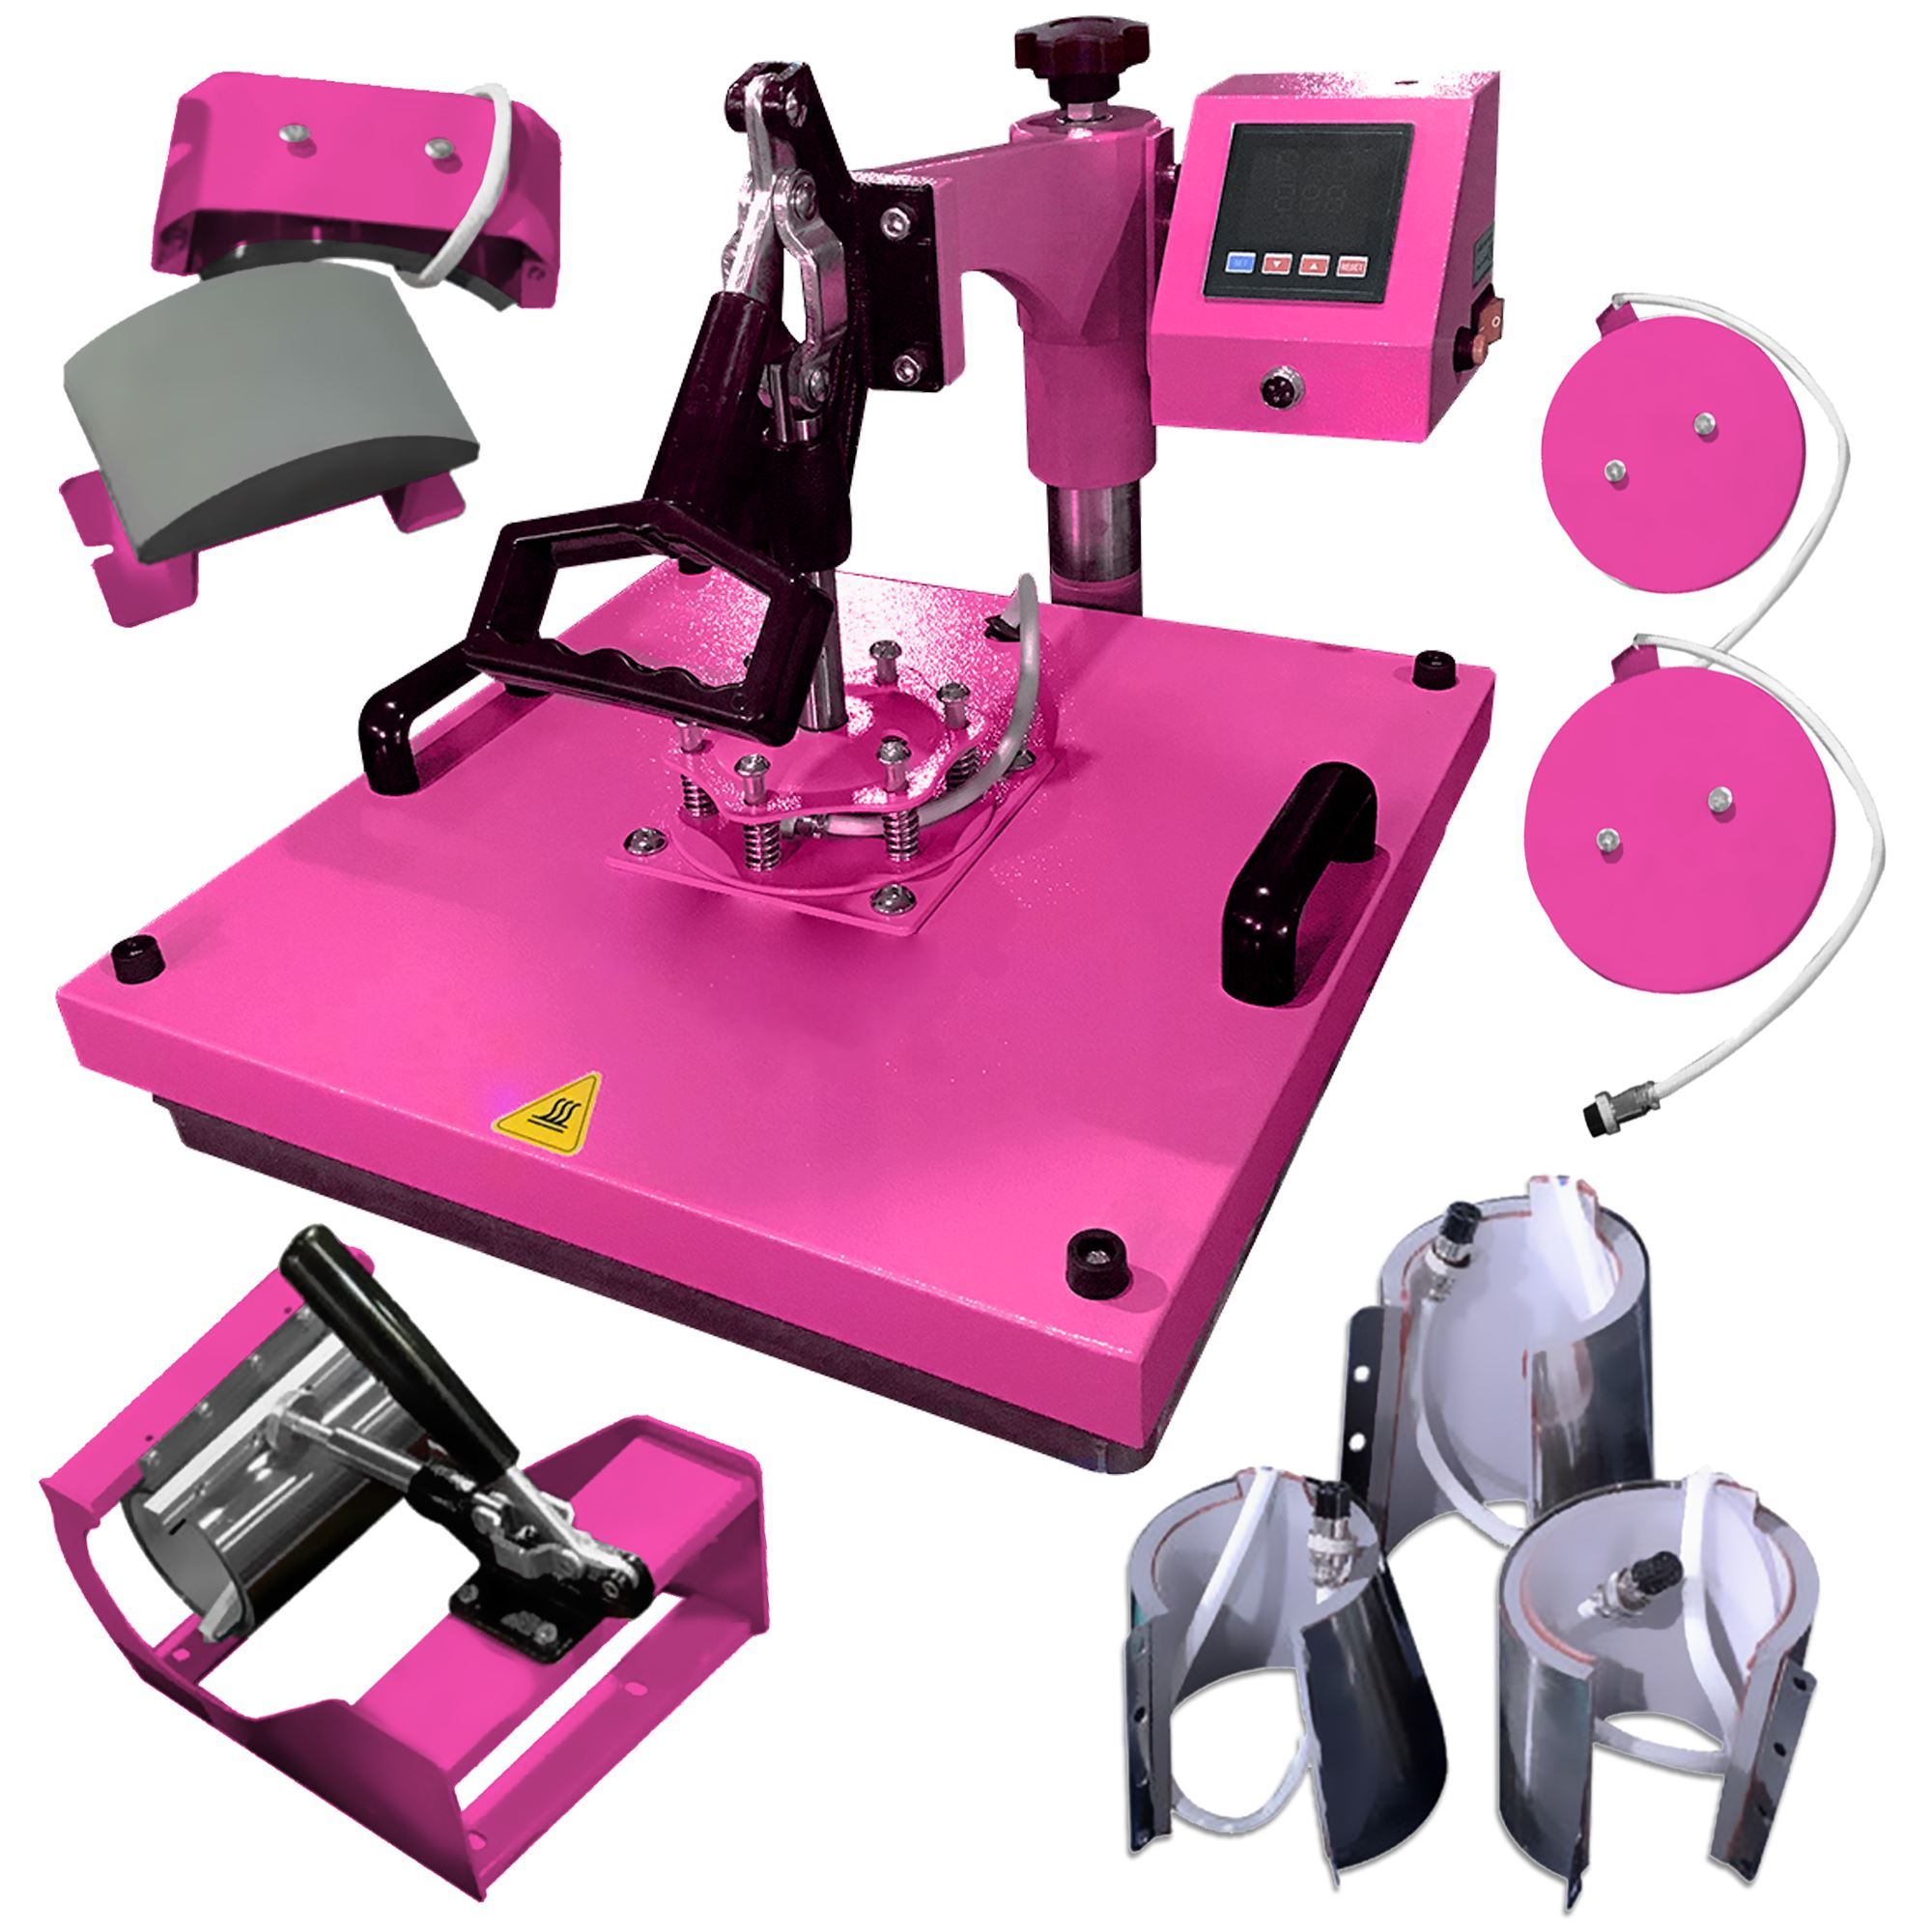 13 Pieces Heat Press Pillow Bundle Making Tools Kit, Include 4 Heat Pressing Transfer Pillow, 6 Heat Transfer Sheet and 3 Heat Resistant Tape for